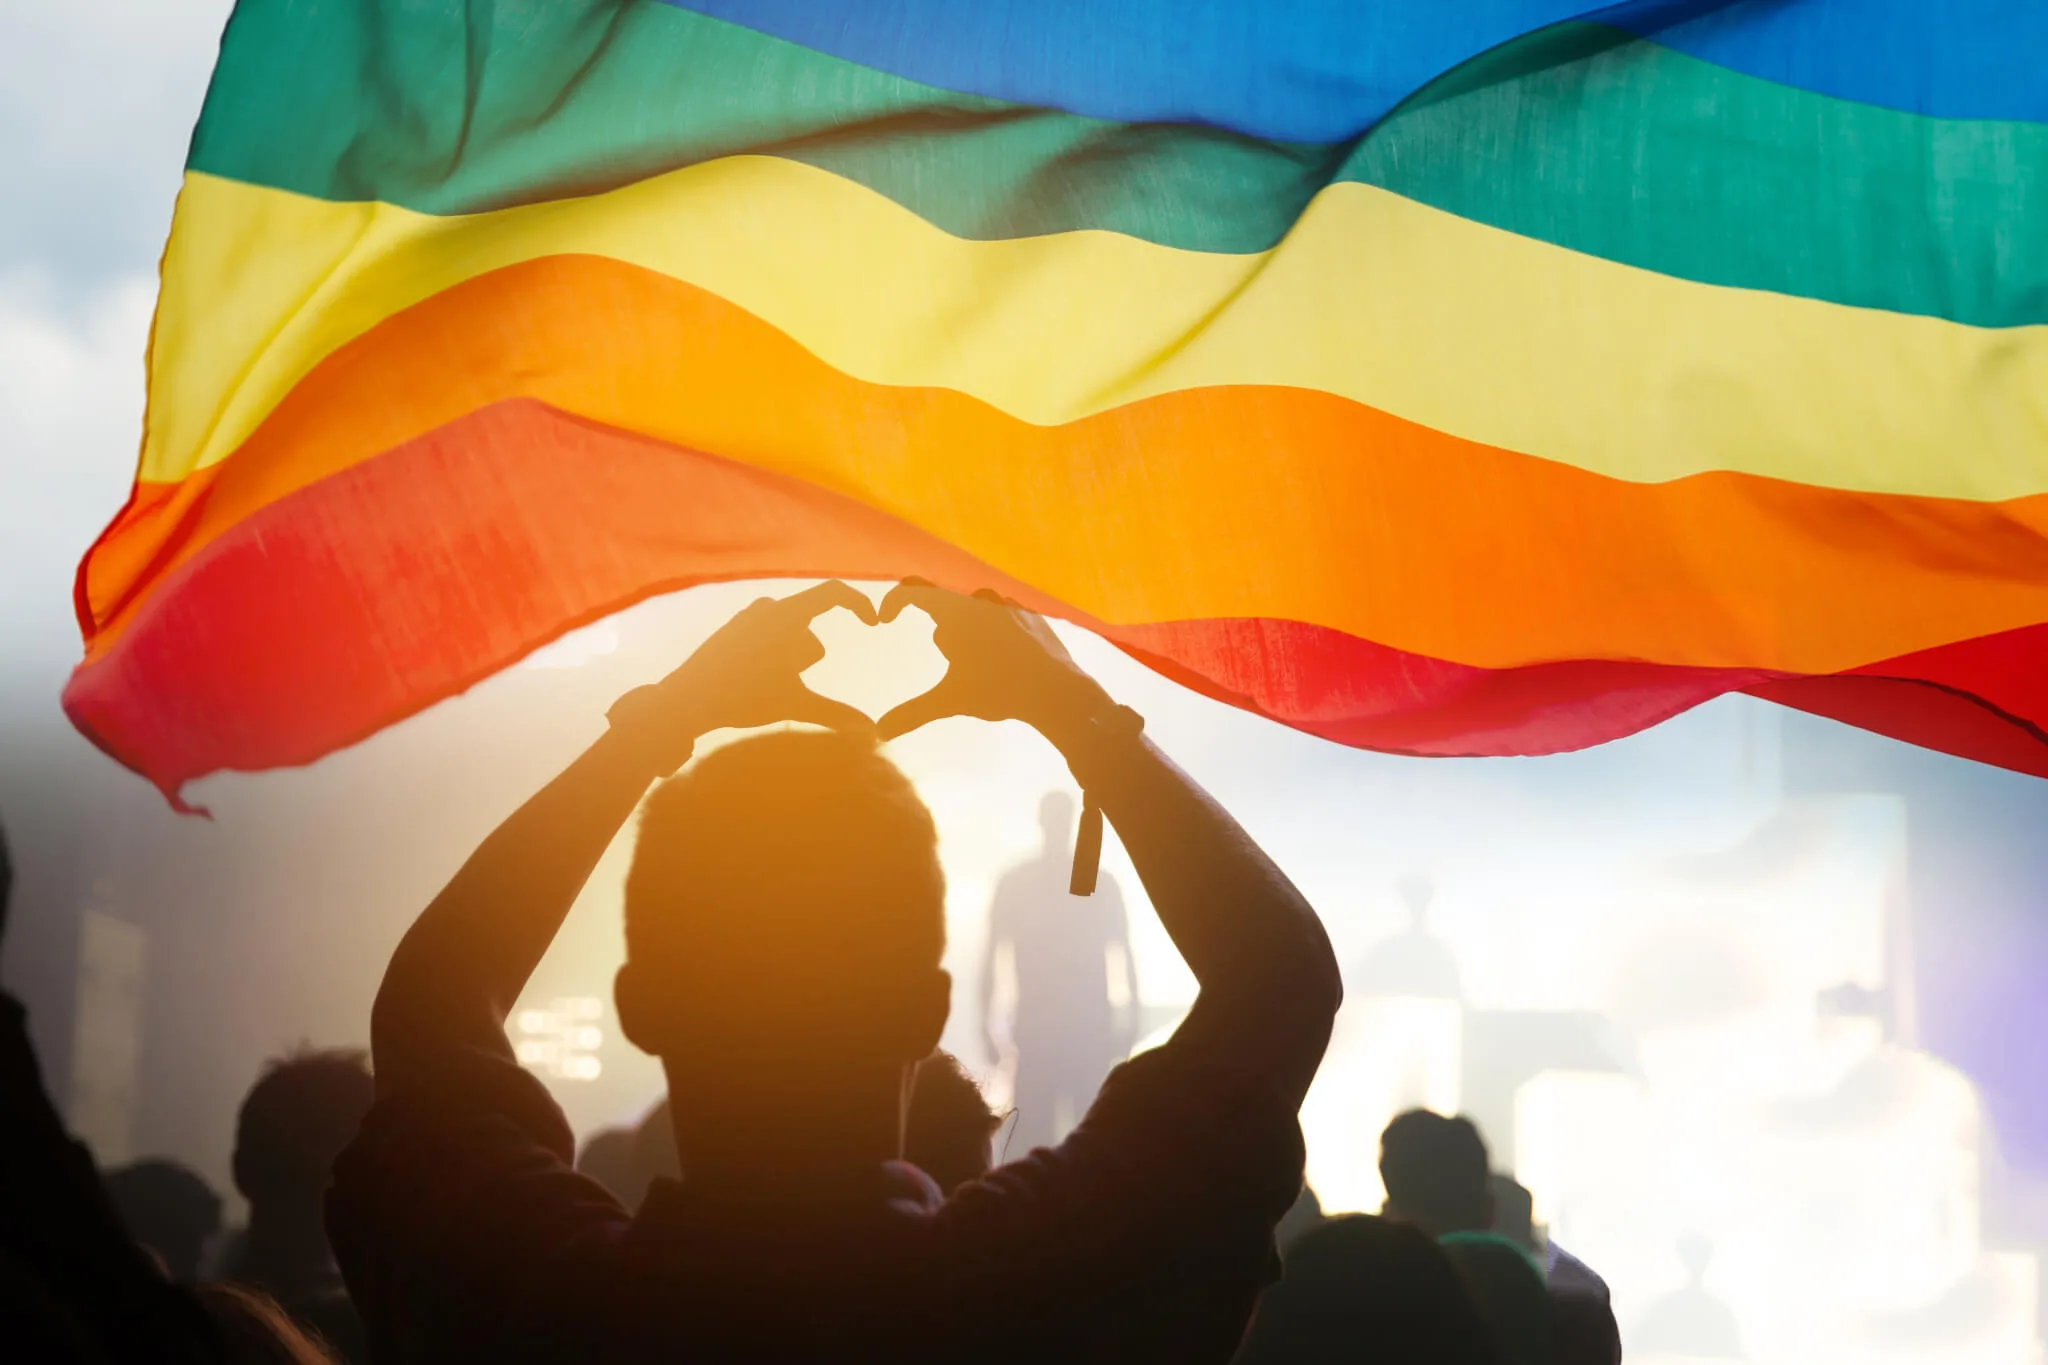 A person backlit by the sun makes a shape of a heart with their fingers while standing beneath a rainbow flag.